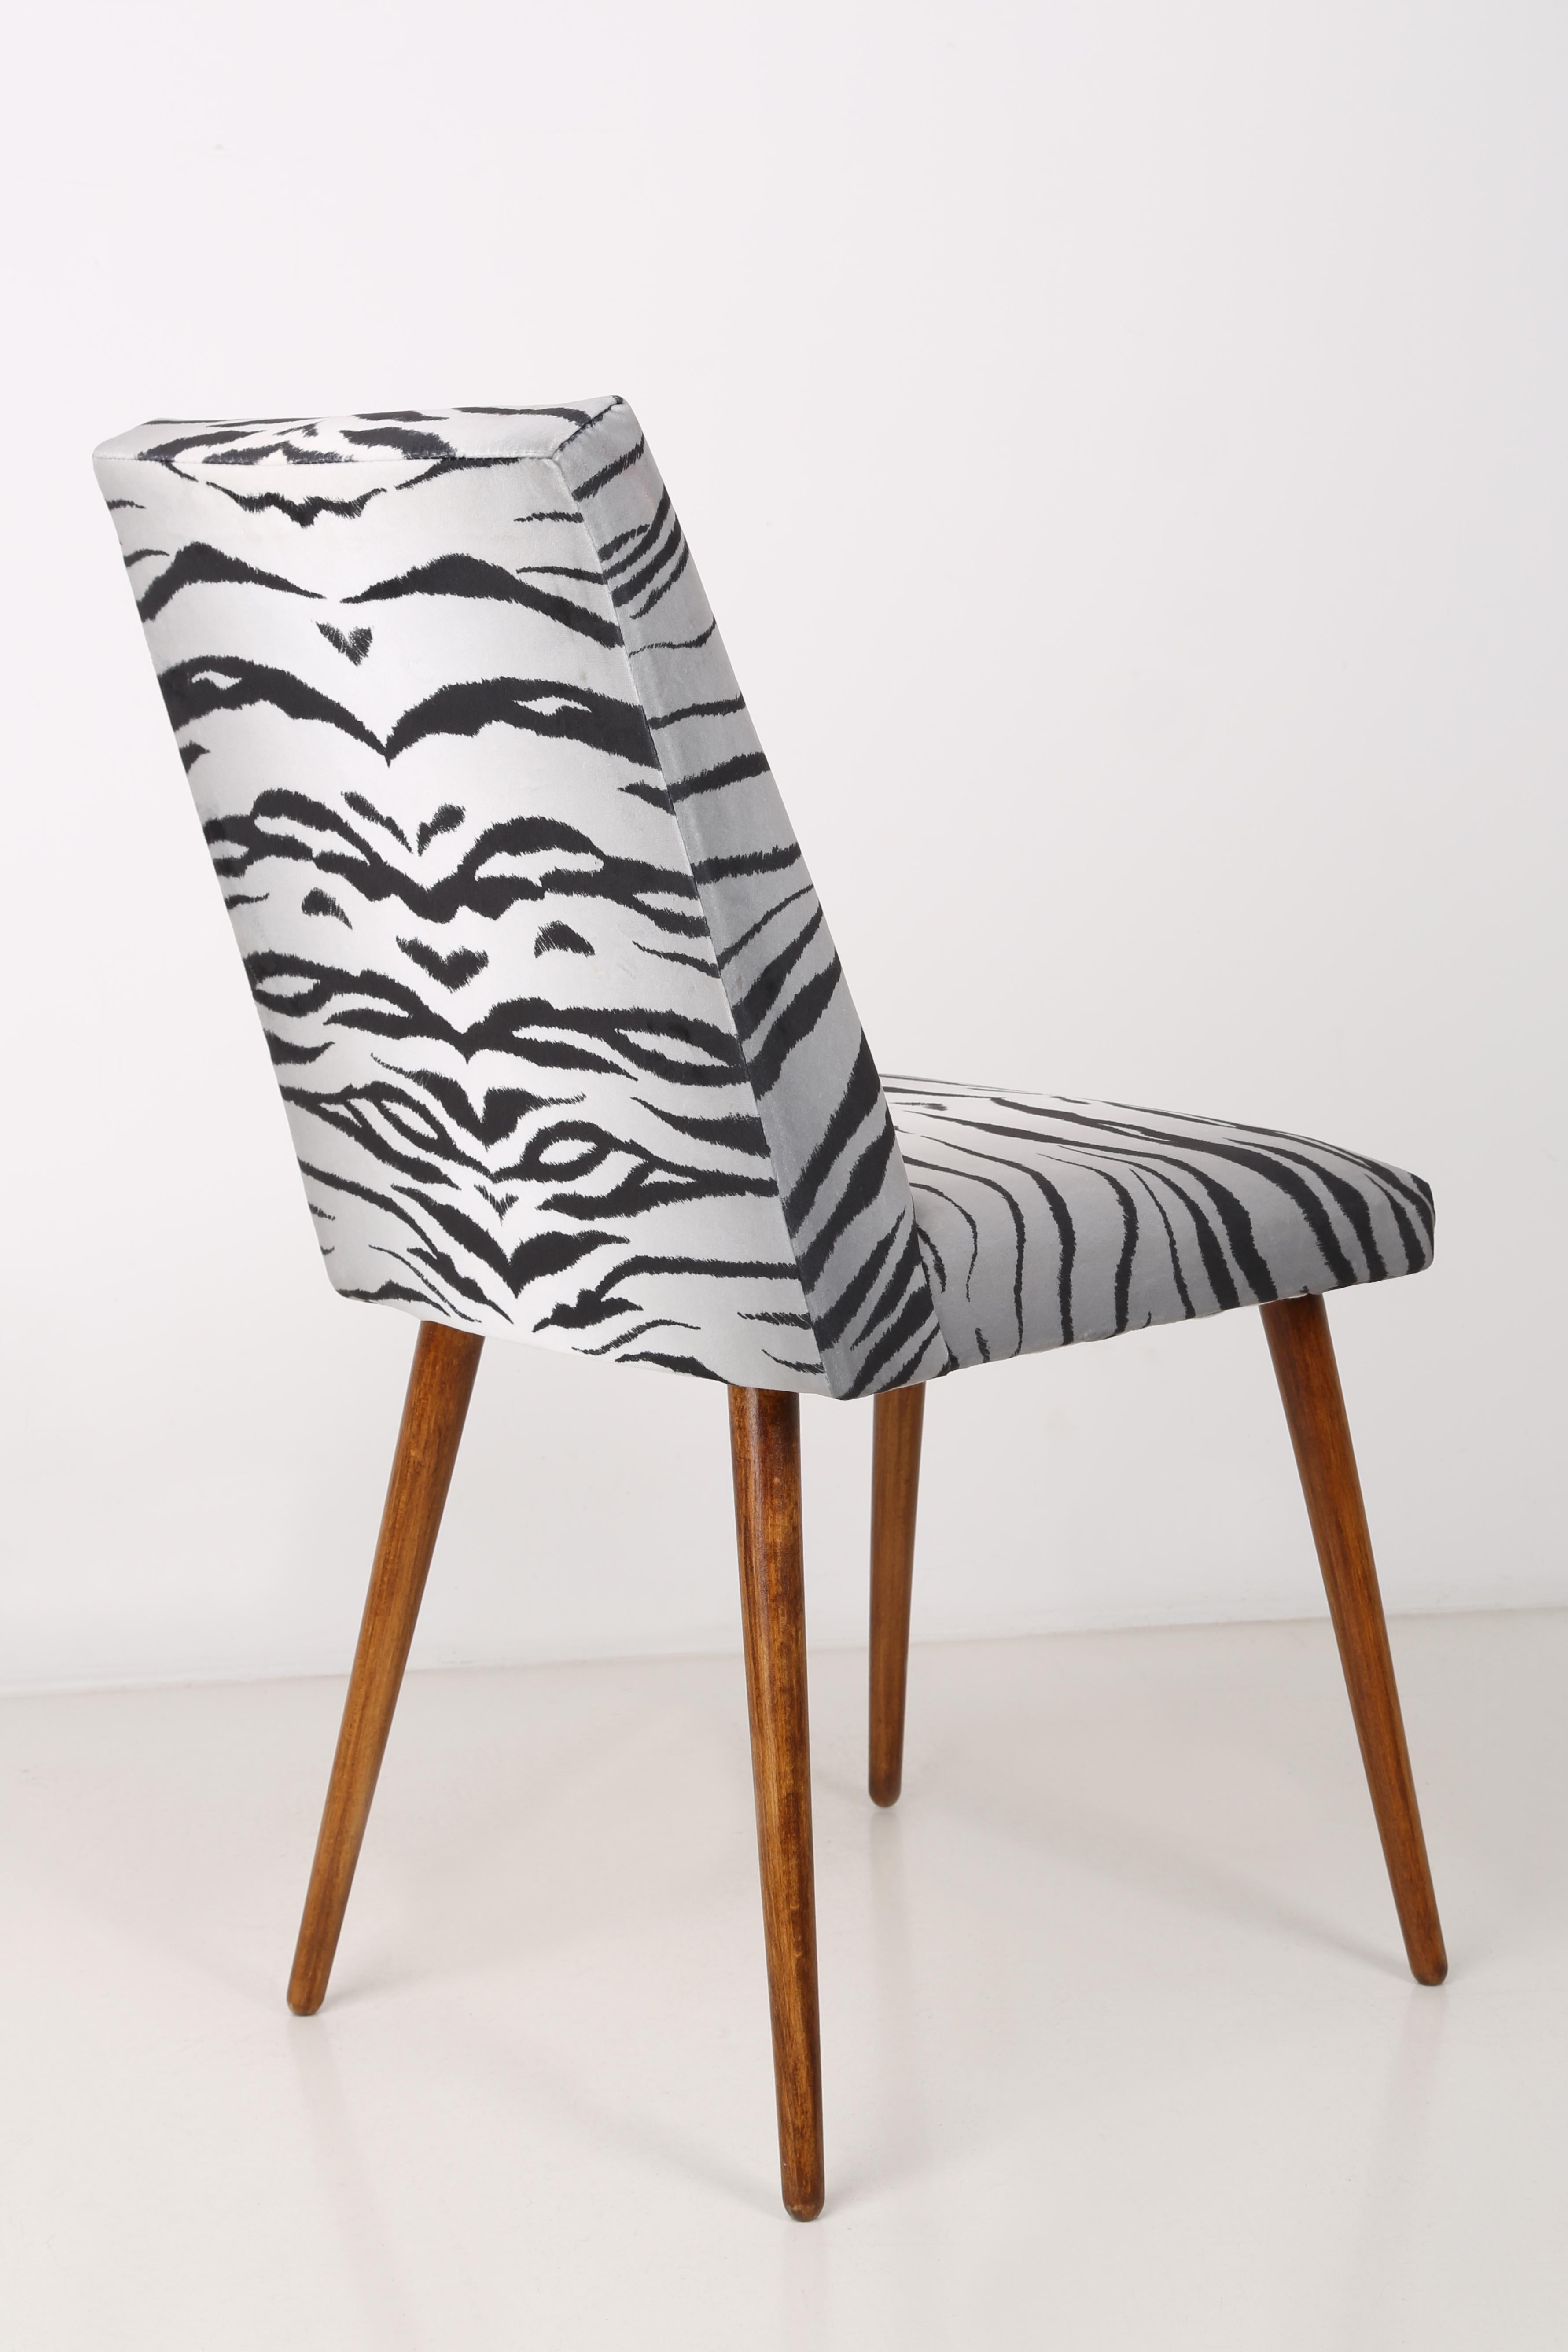 Polish Set of Two 20th Century Black and White Zebra Velvet Chairs, 1960s For Sale